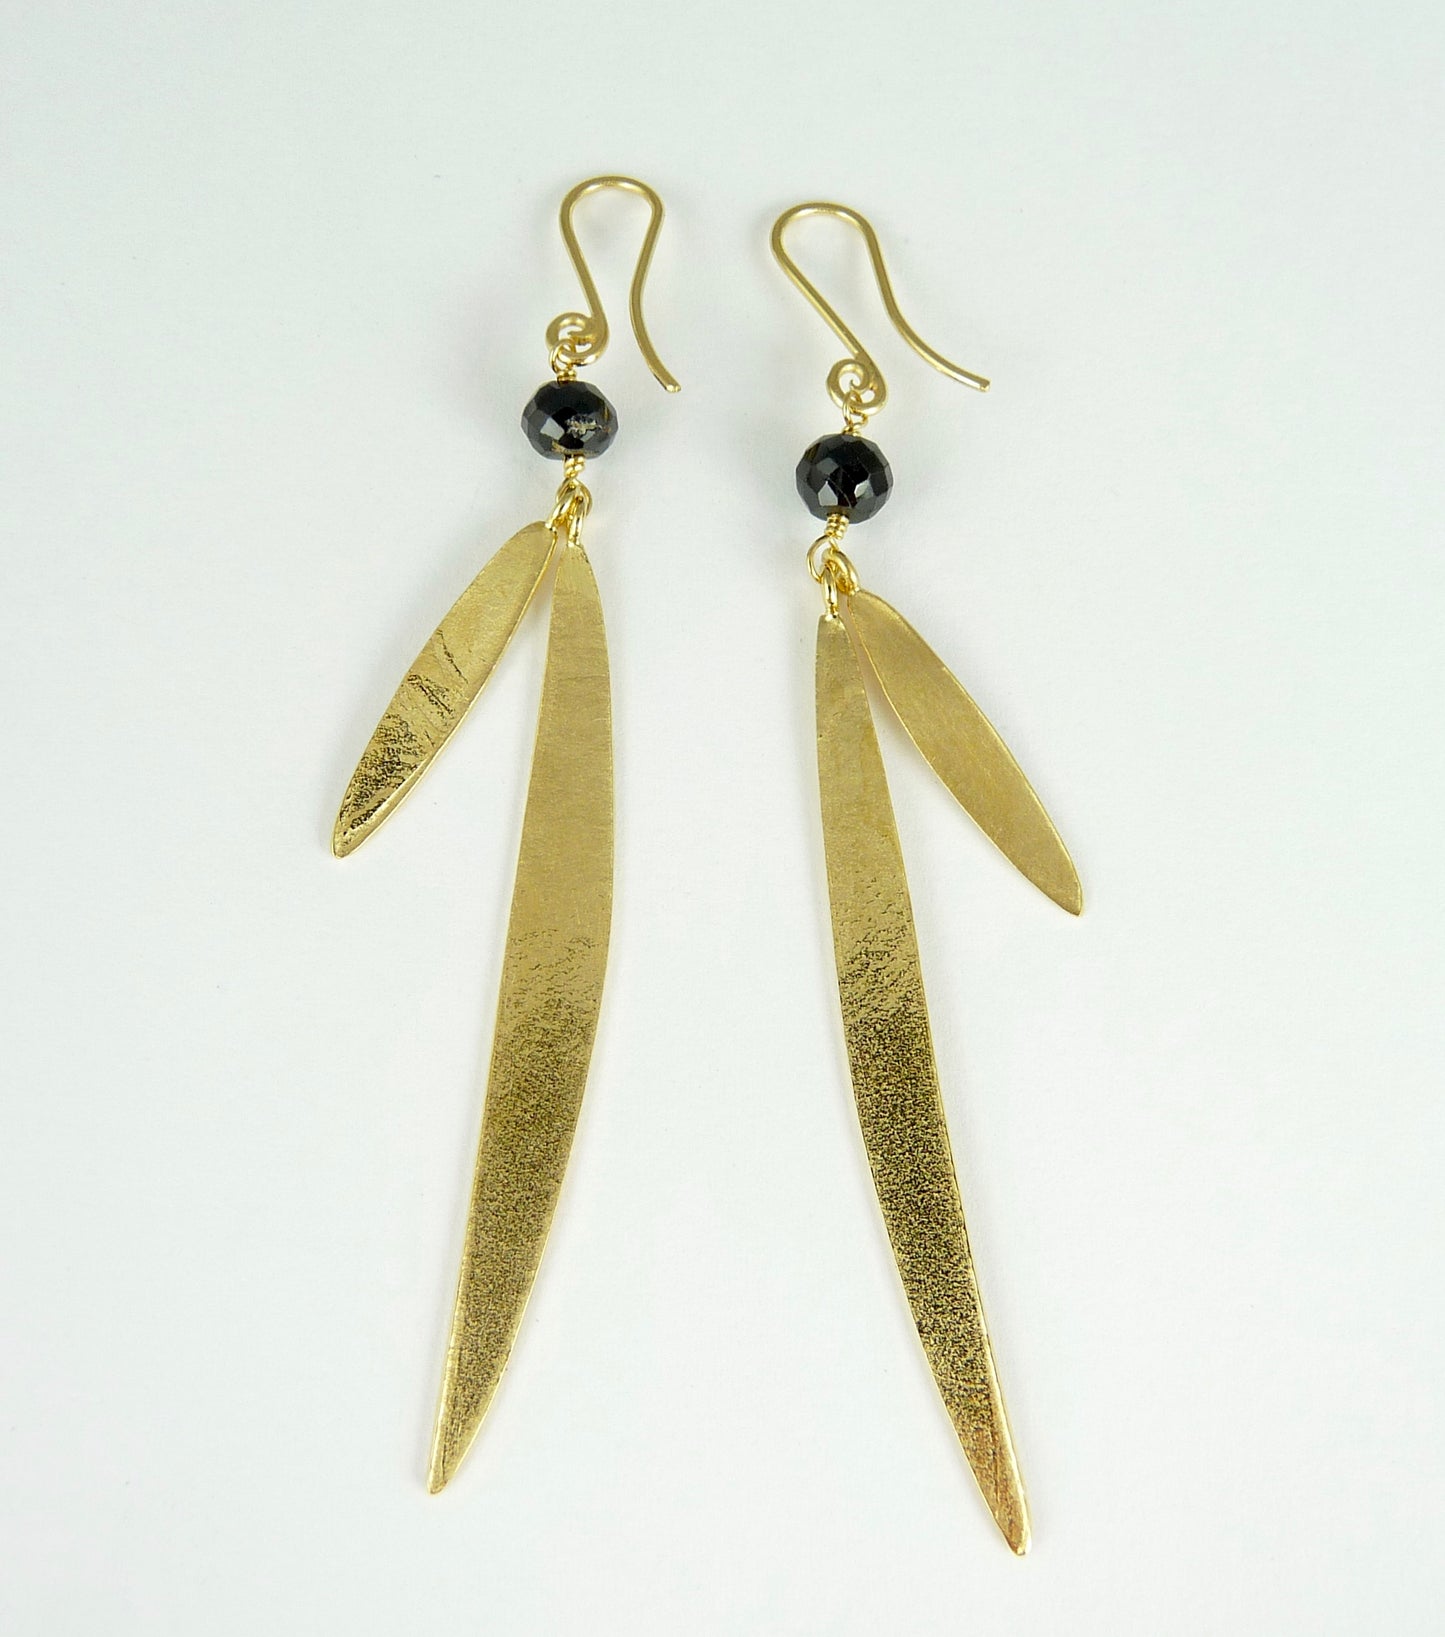 Lily Long Double Leaf Earrings with Black Spinel